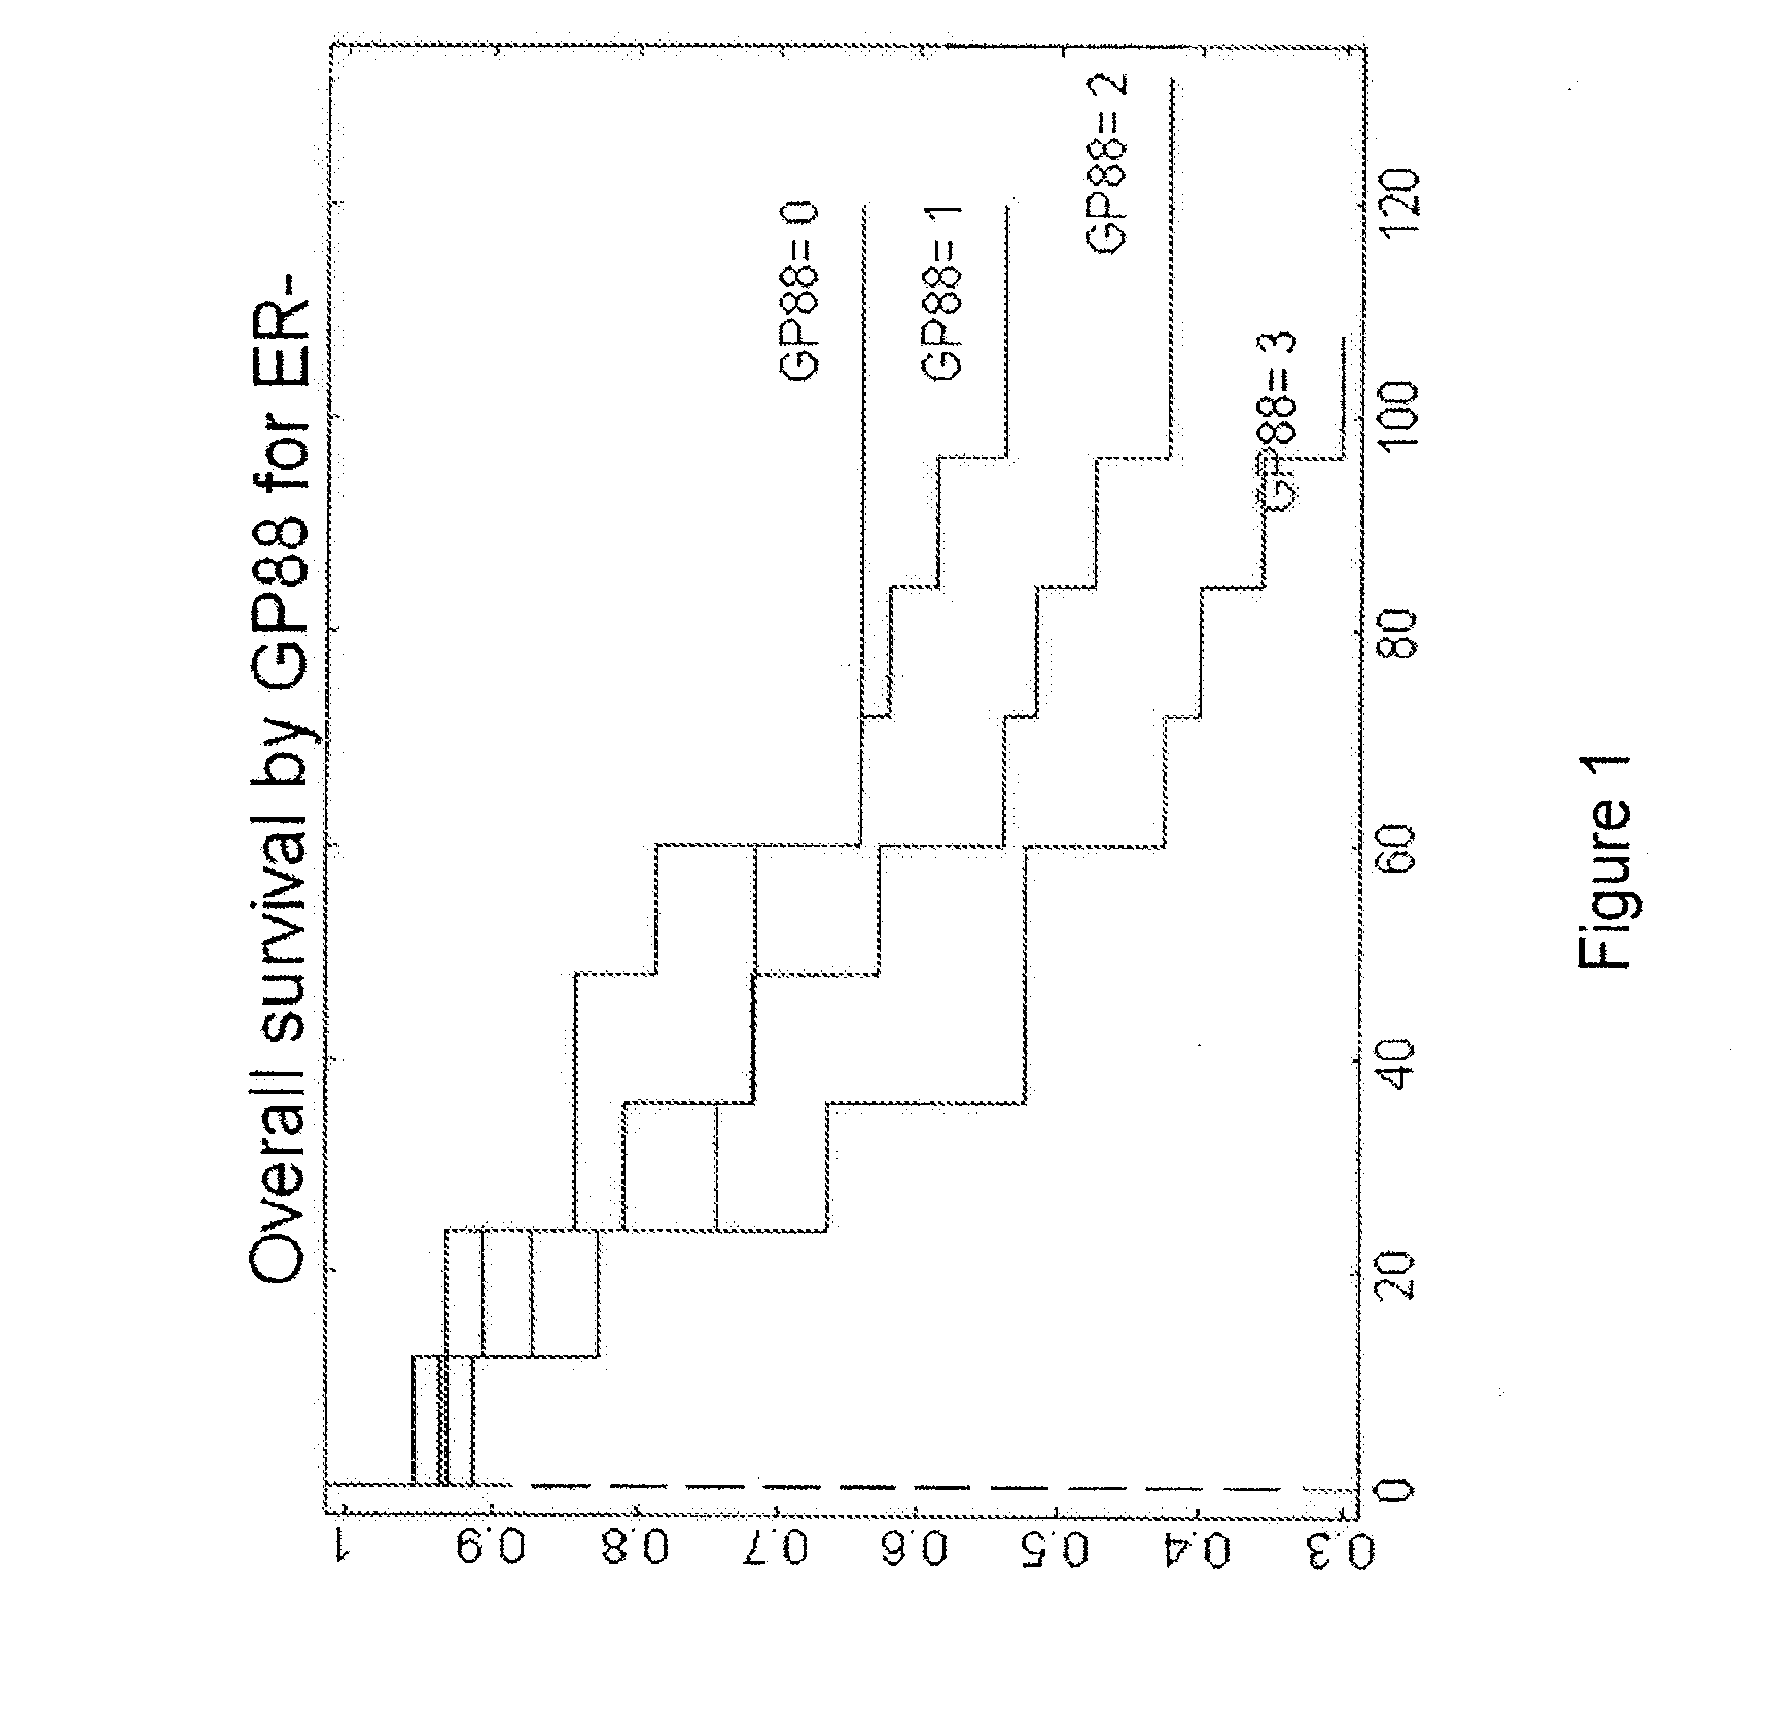 Methods for diagnosing cancer and determining the overall survival and disease-free survival of cancer patients